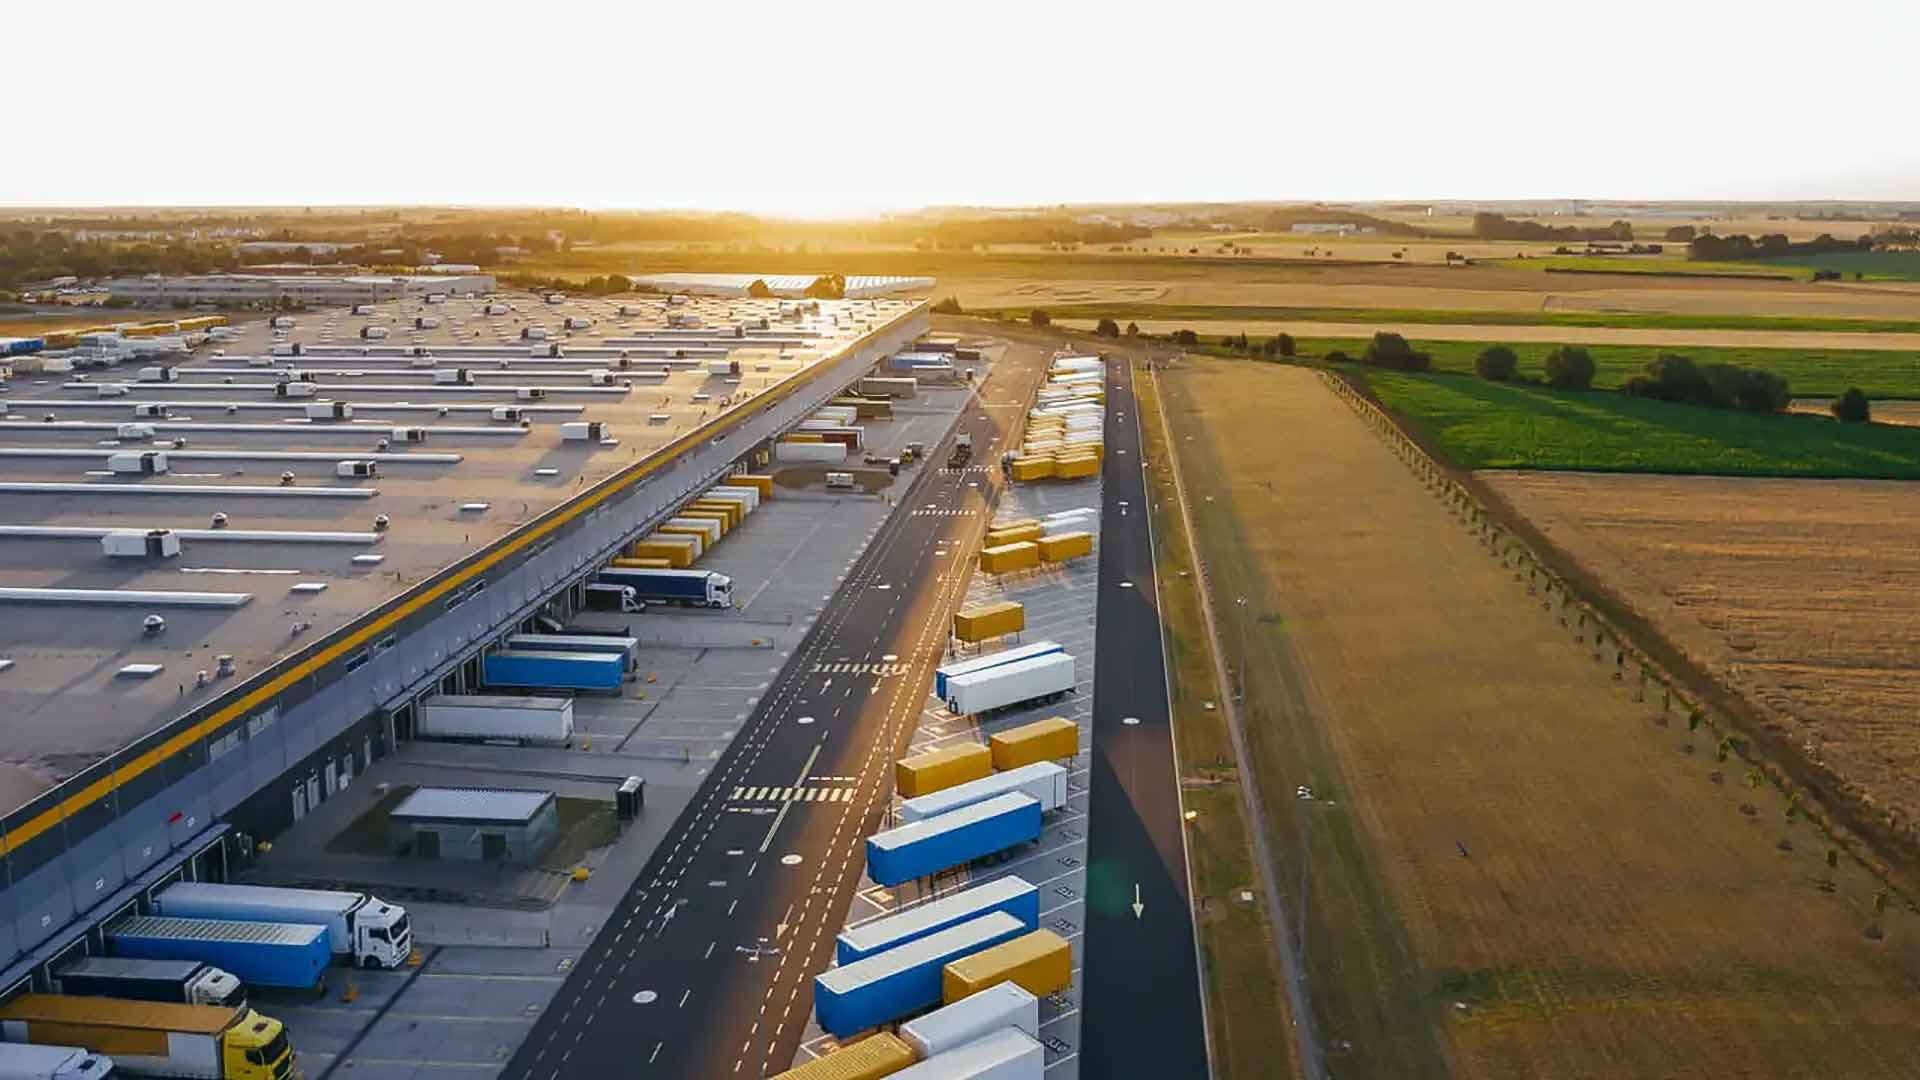 A distribution center with trucks and trailers ready for freight services